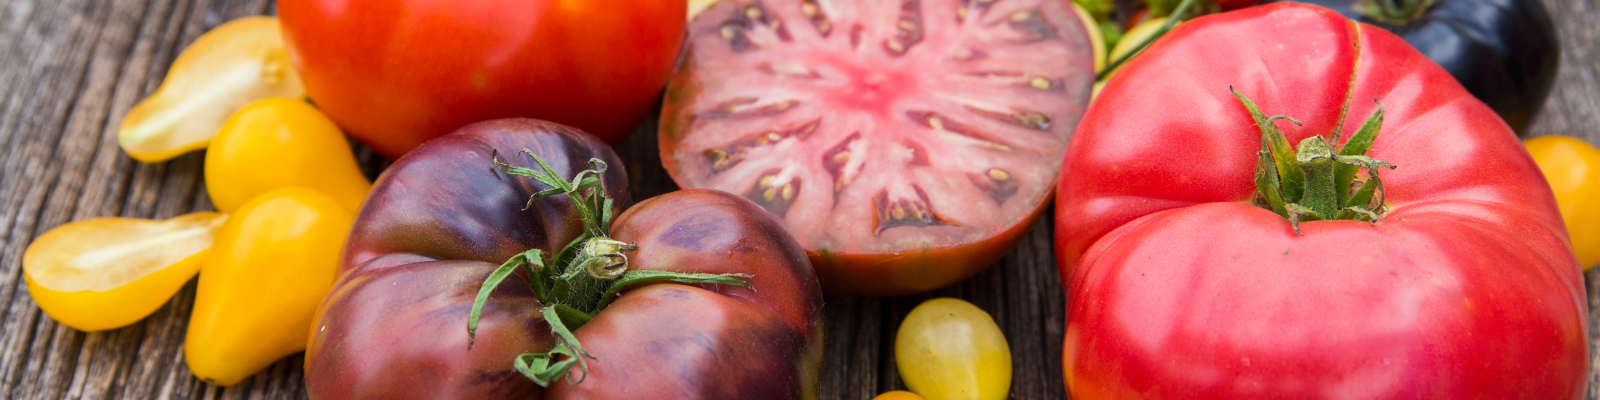 Red, purple, and yellow tomato fruits.